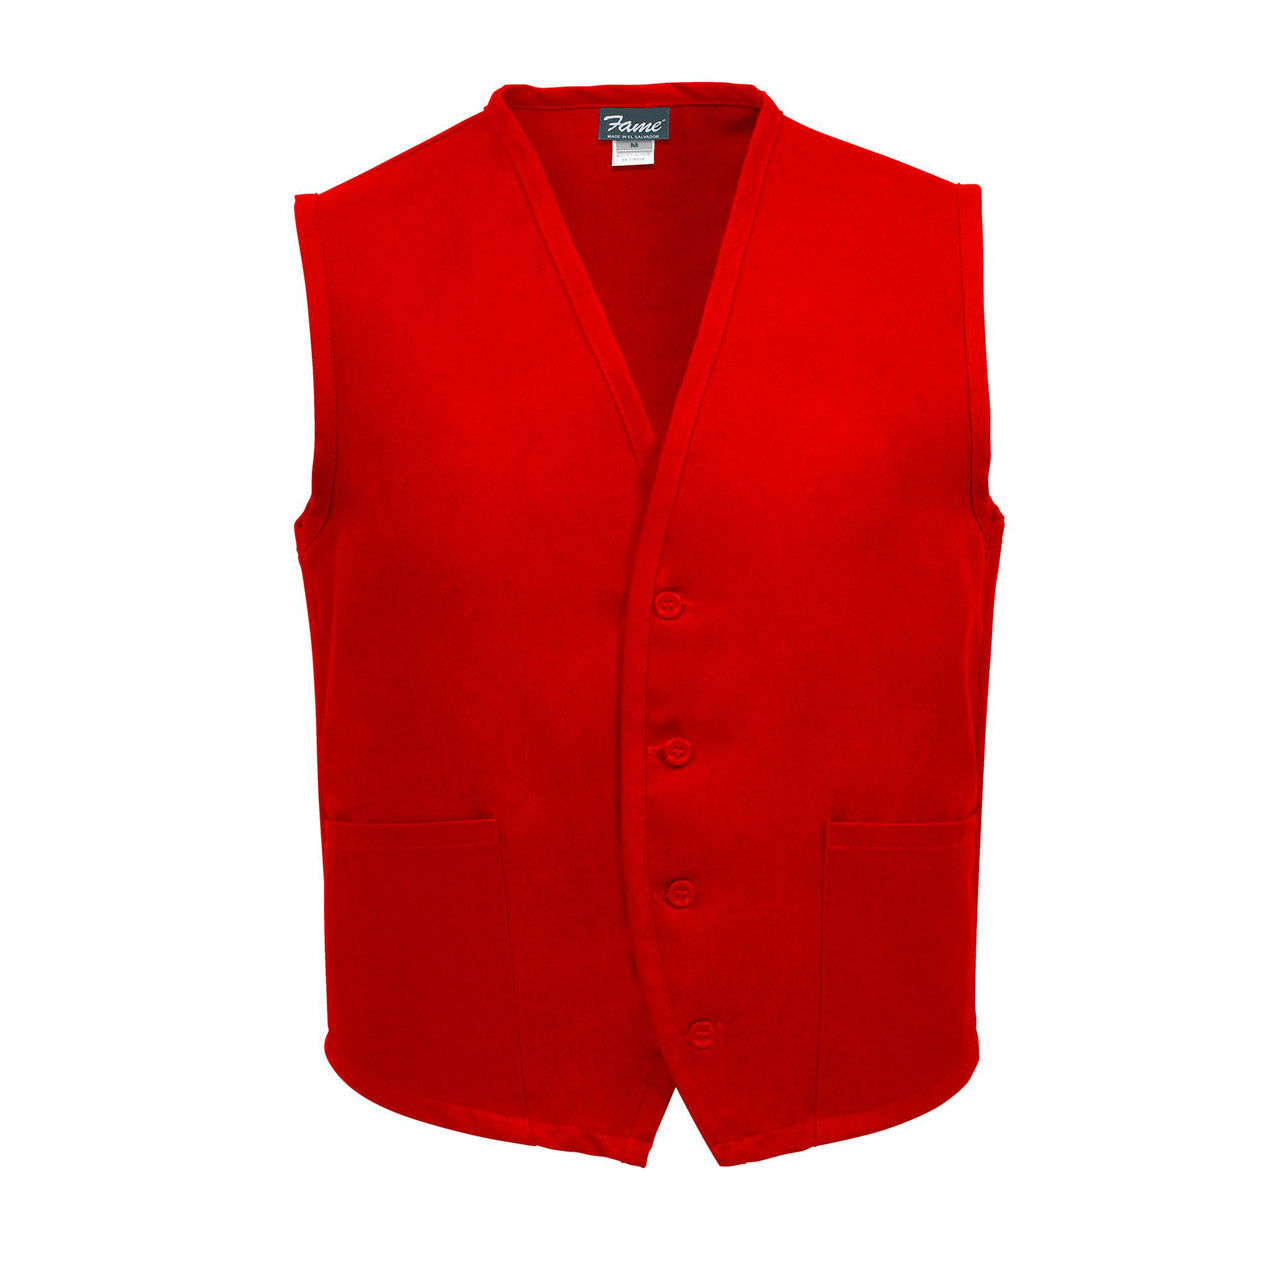 What is the material of the red vest in the Unisex Uniform Vest, 2 Pocket, Red?